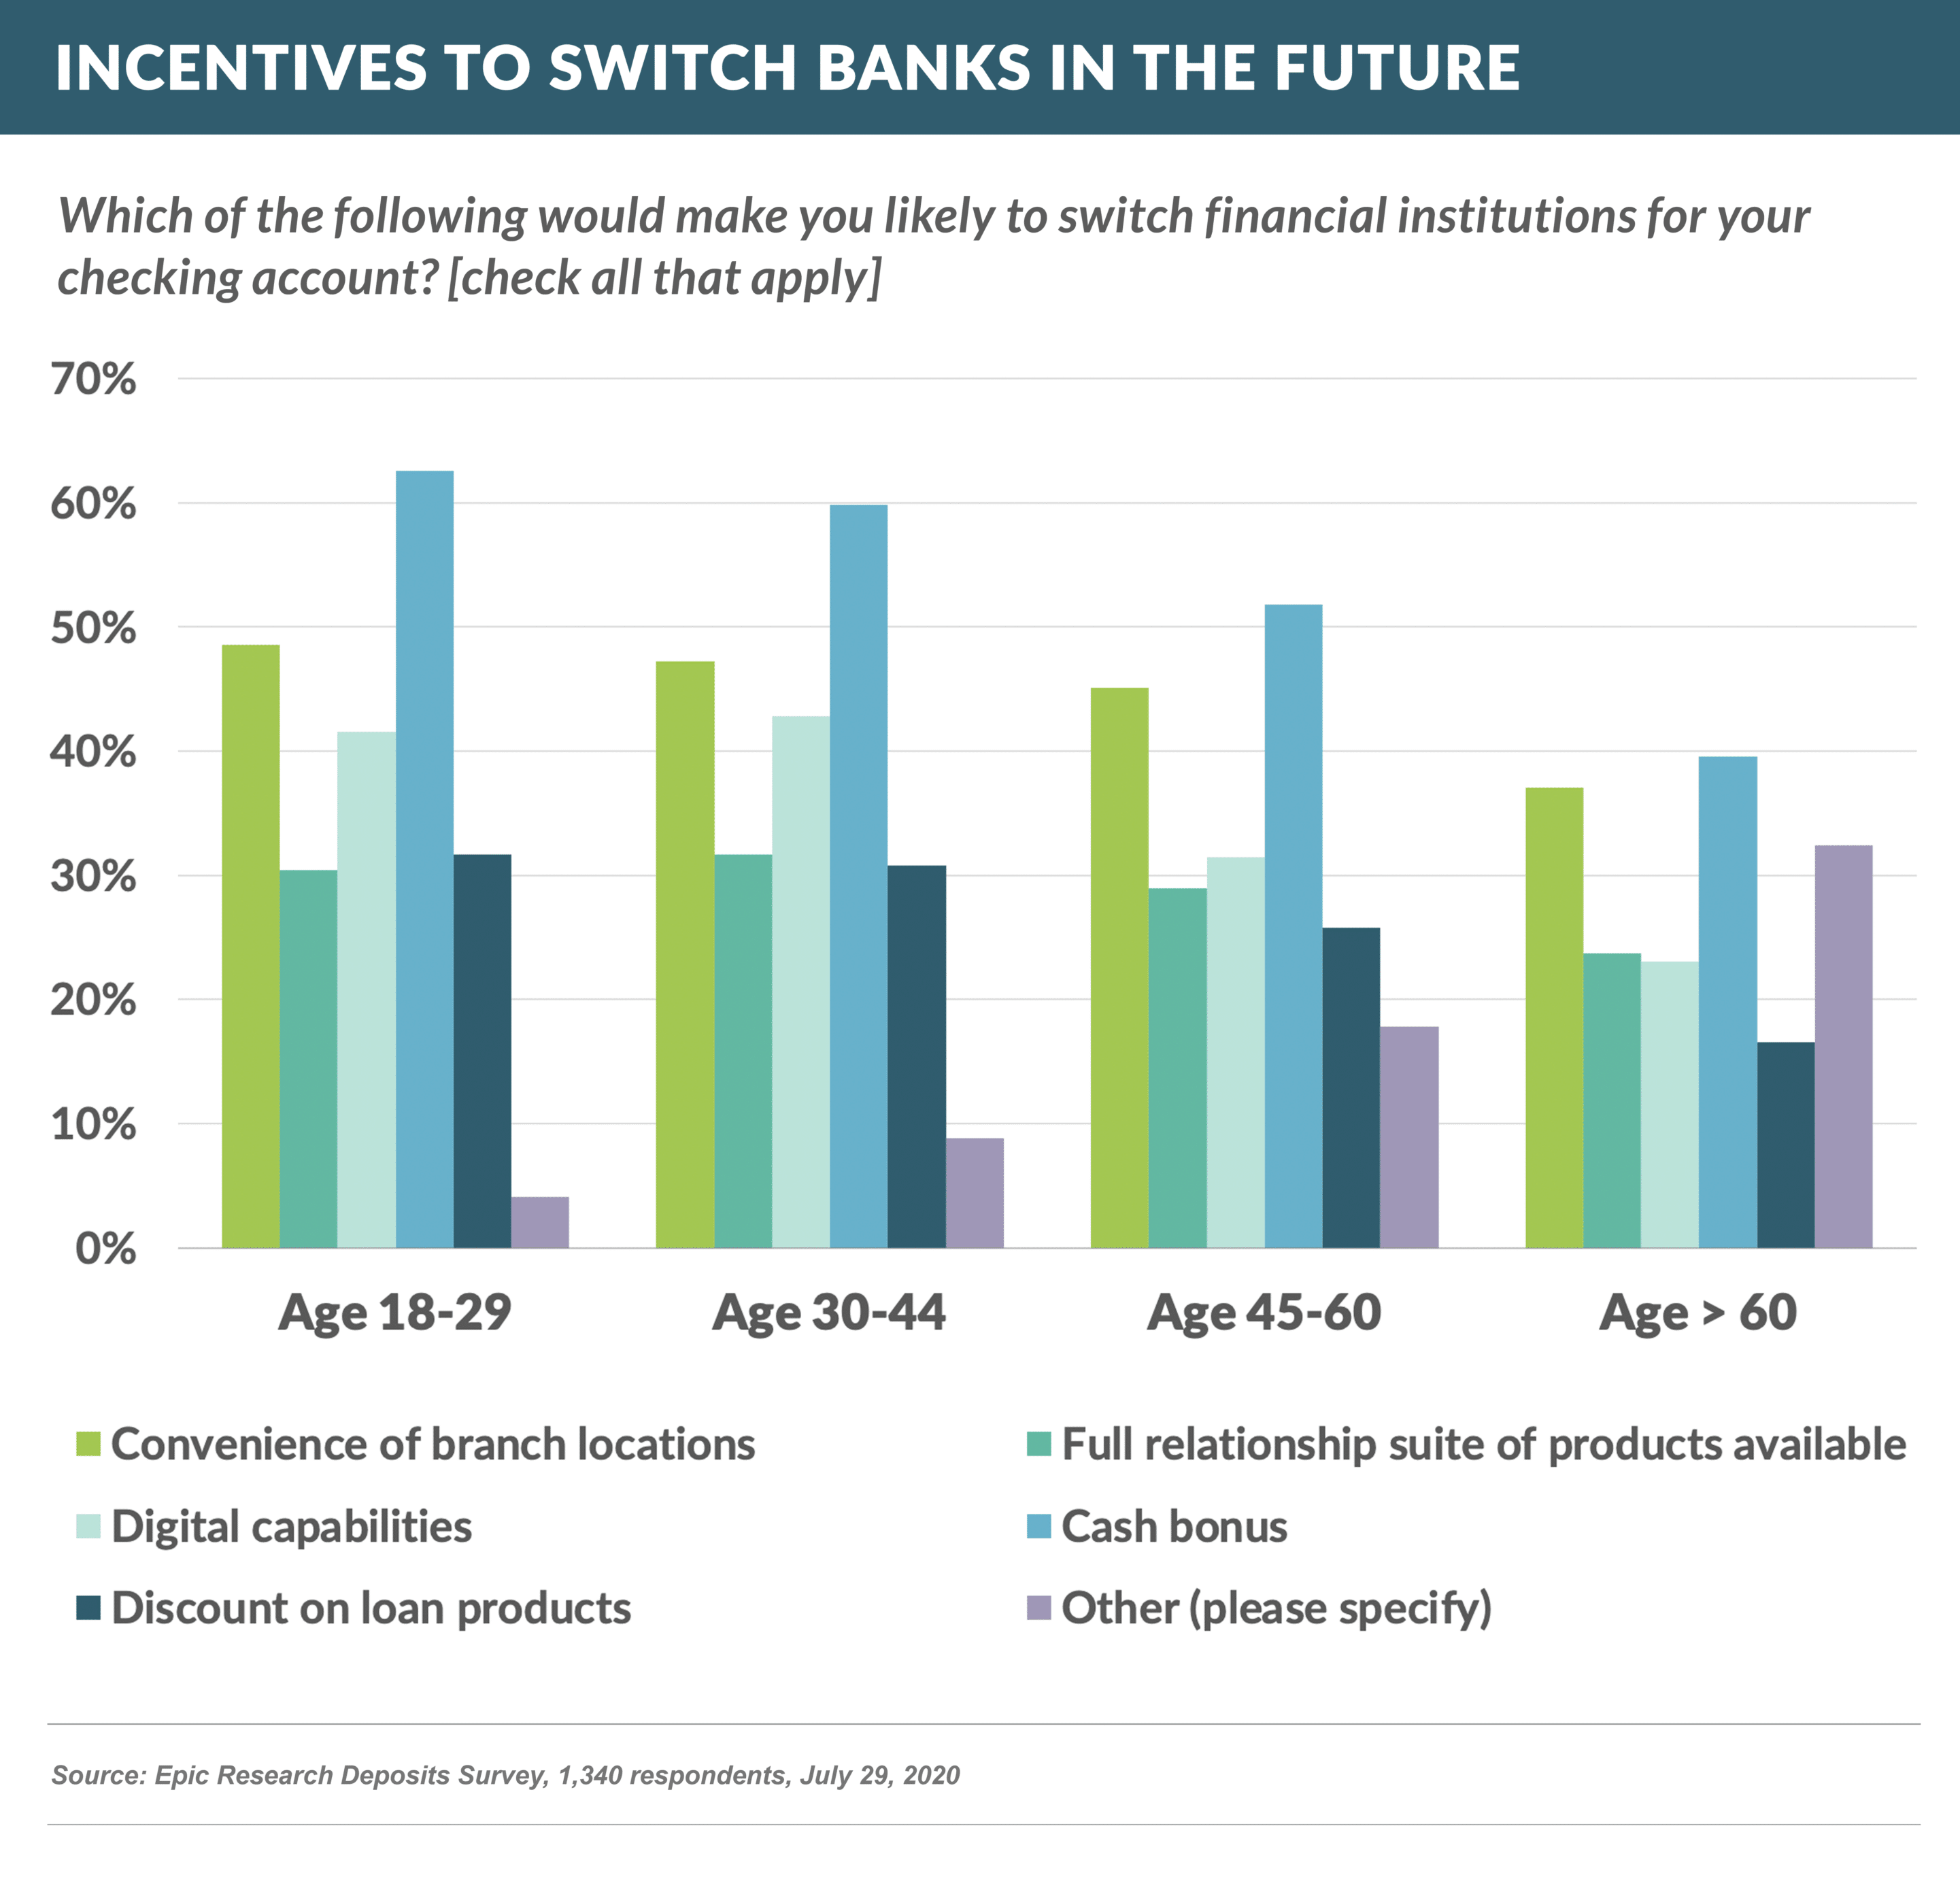 Incentives to Switch Banks in the Future